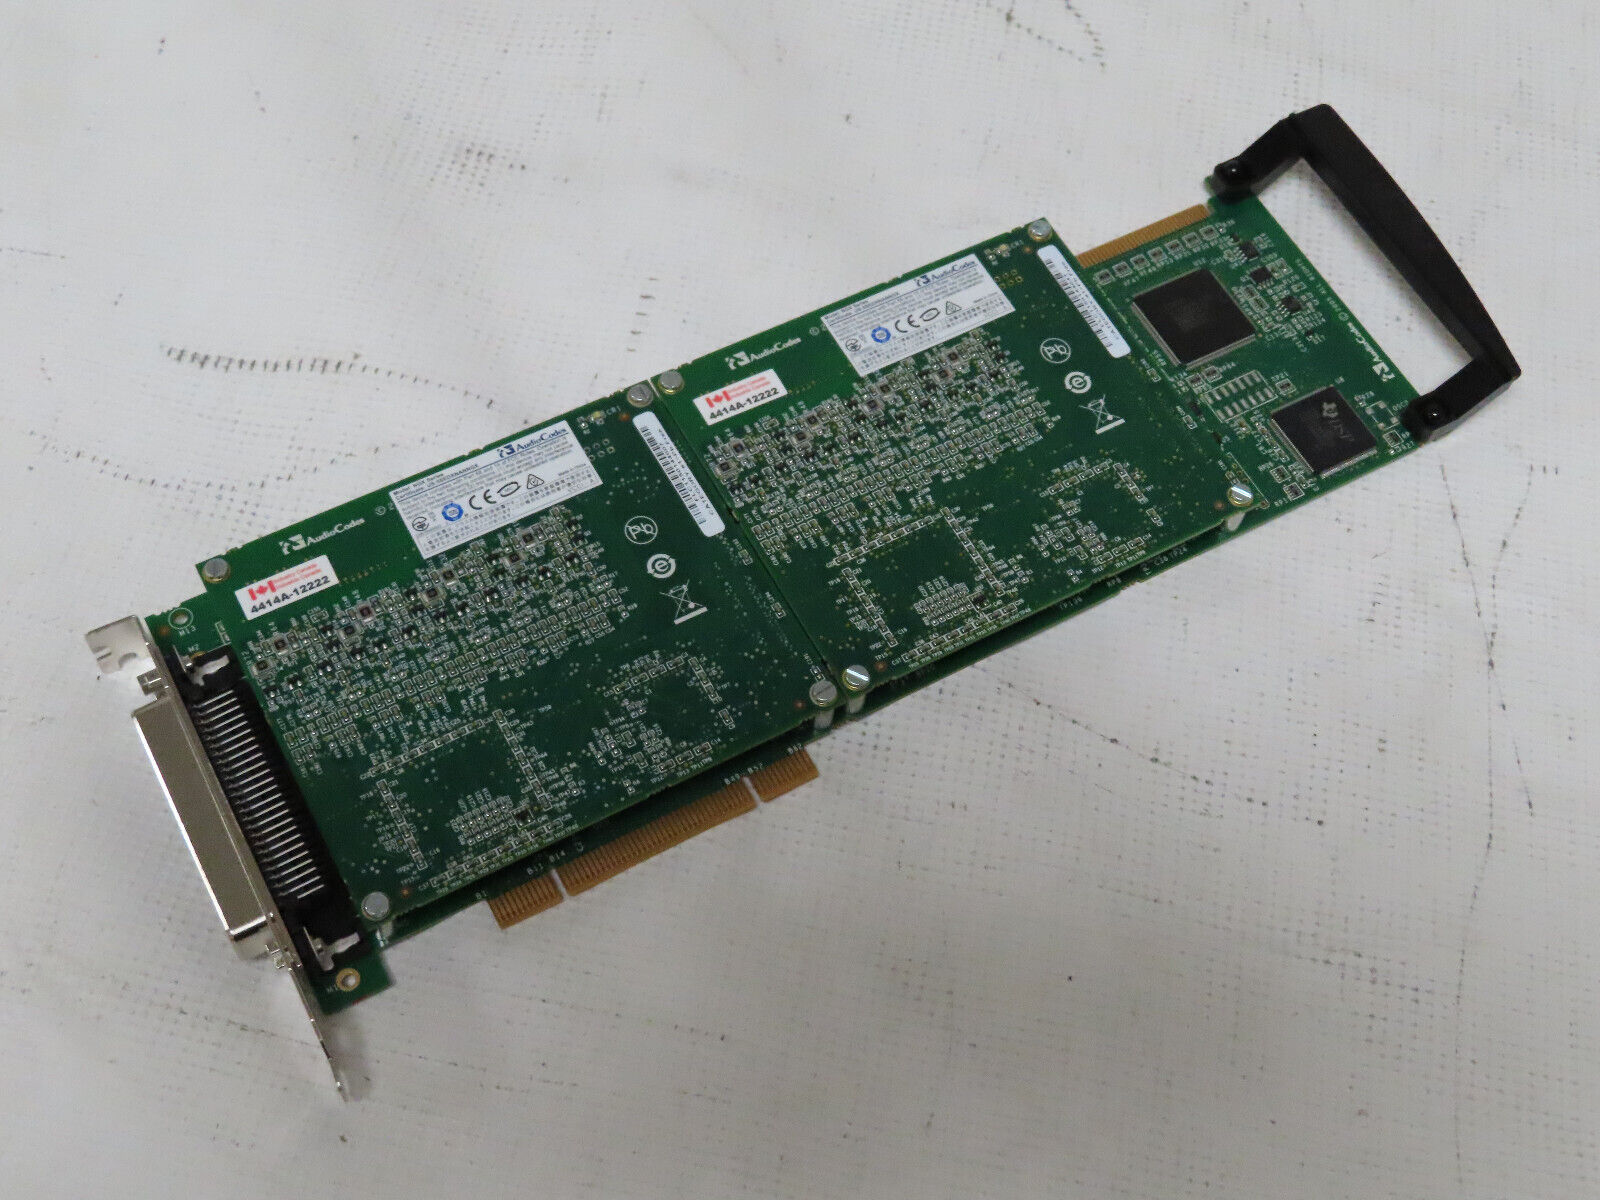 Audio Codes NGX Series 24 Channel PCI Controller Card 910-0314-003 Rev L